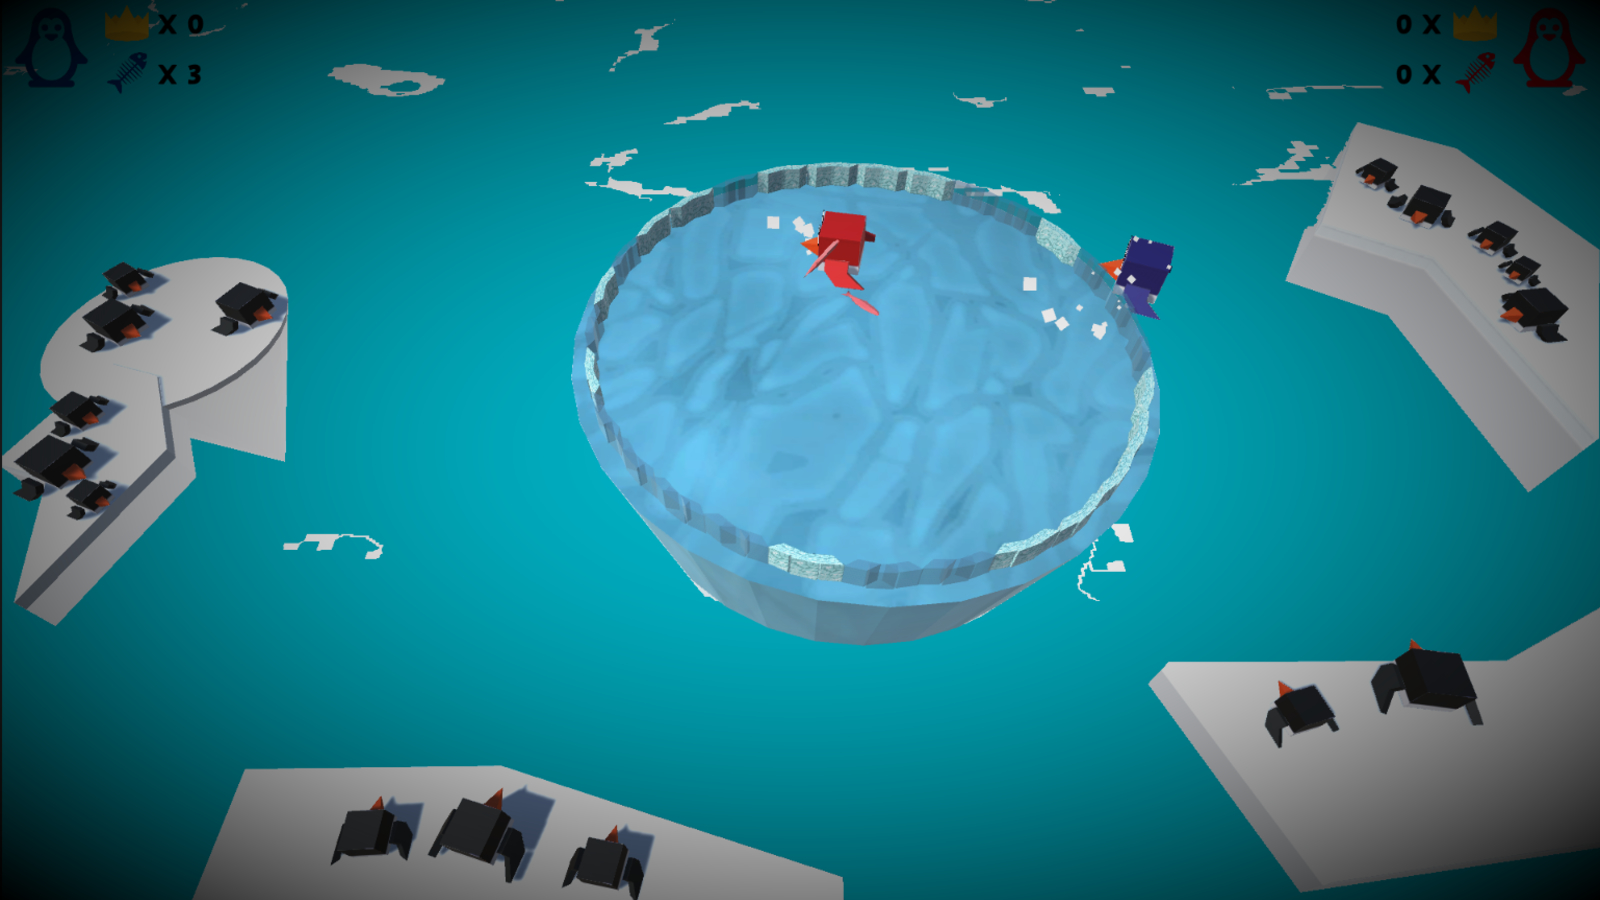 Players attempting to knock each other off the slippery iceberg